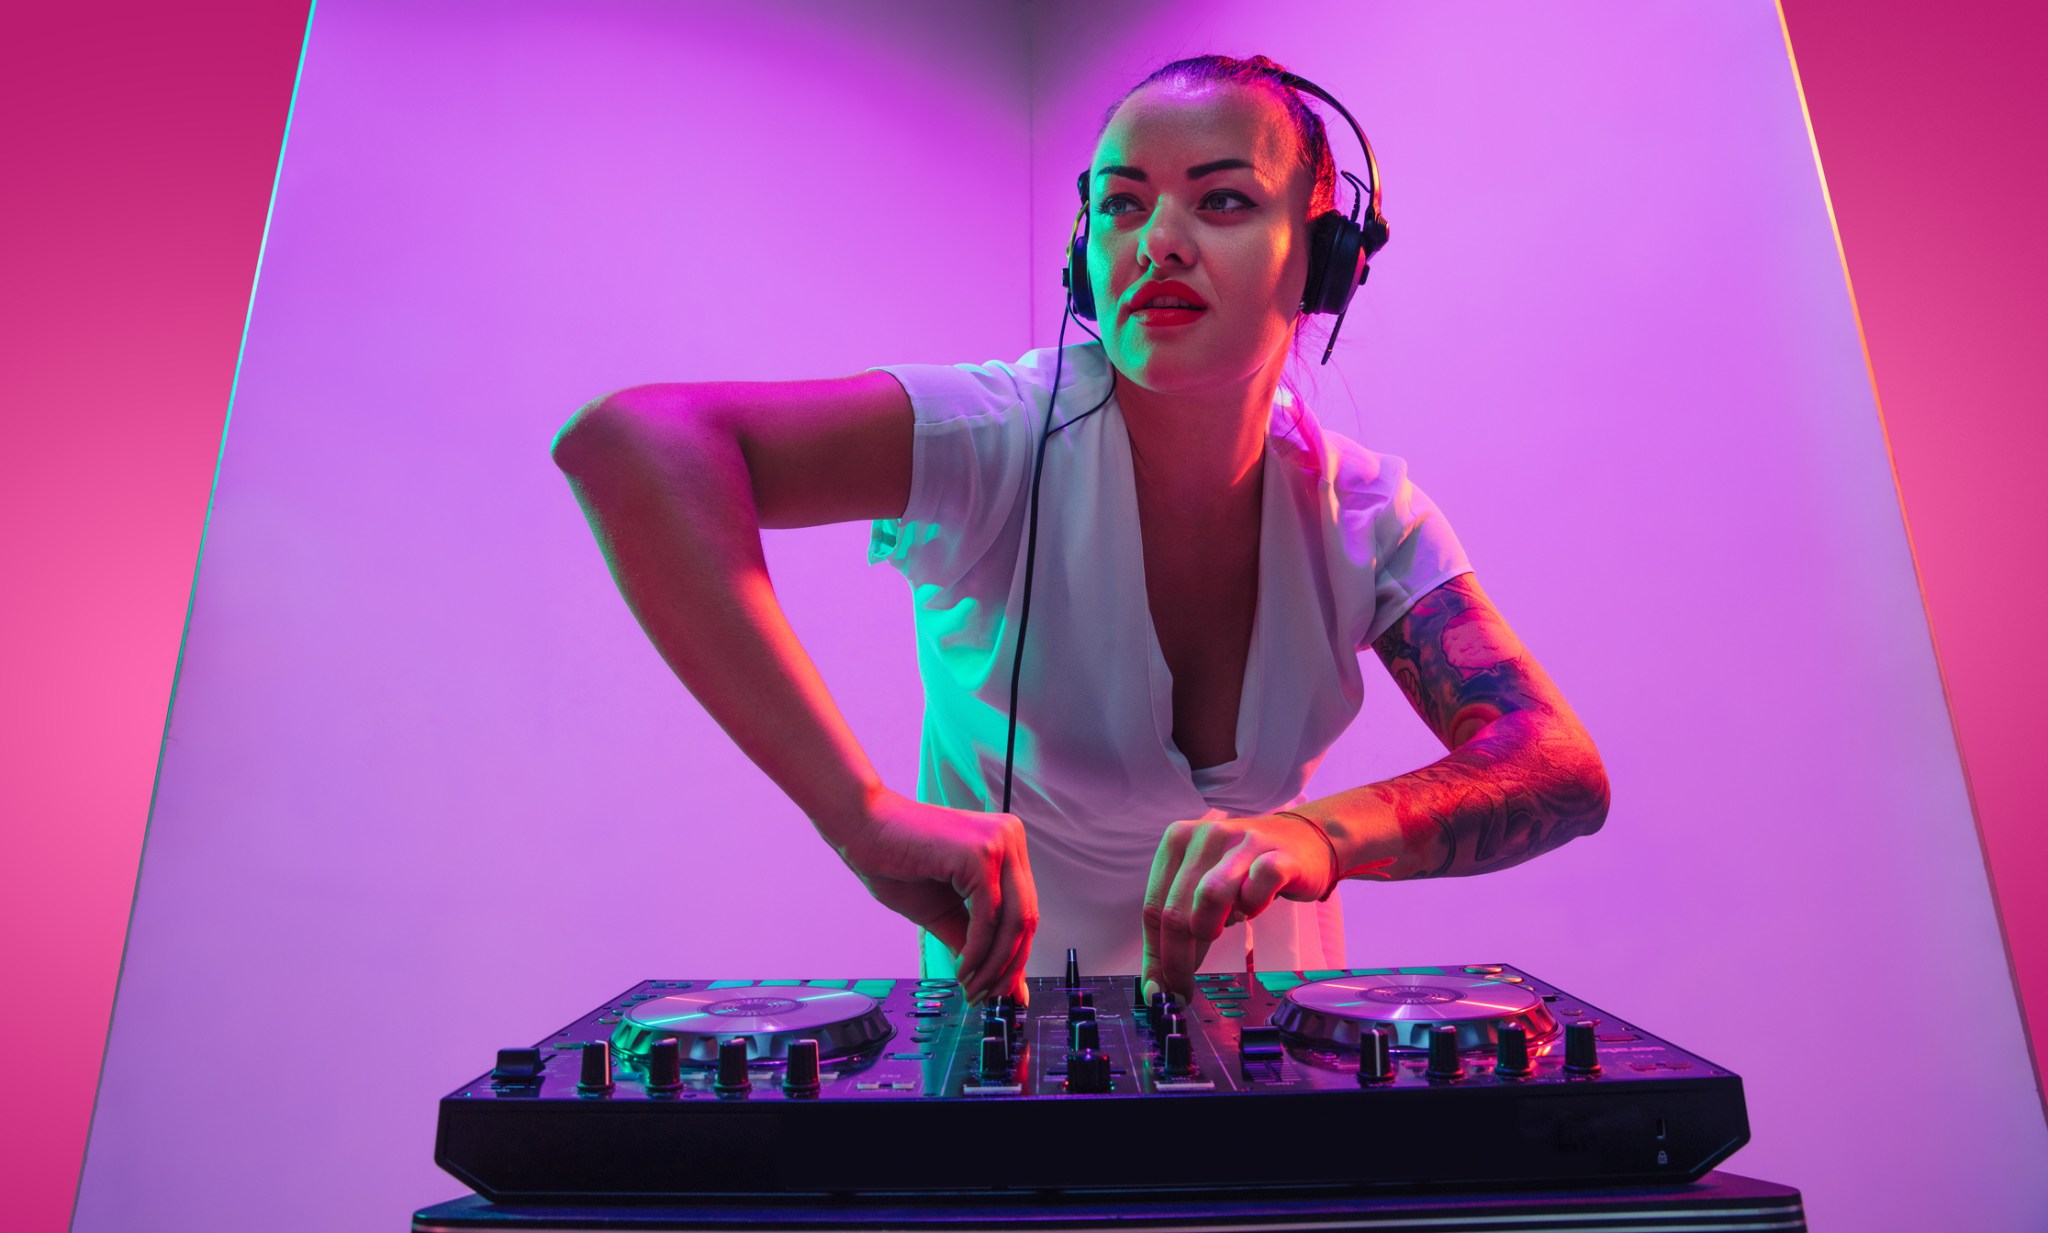 Summertime. Young female musician in headphones performing on purple background in neon light. Concept of music, hobby, festival, entertainment, emotions. Joyful party host, DJ, portrait of artist.